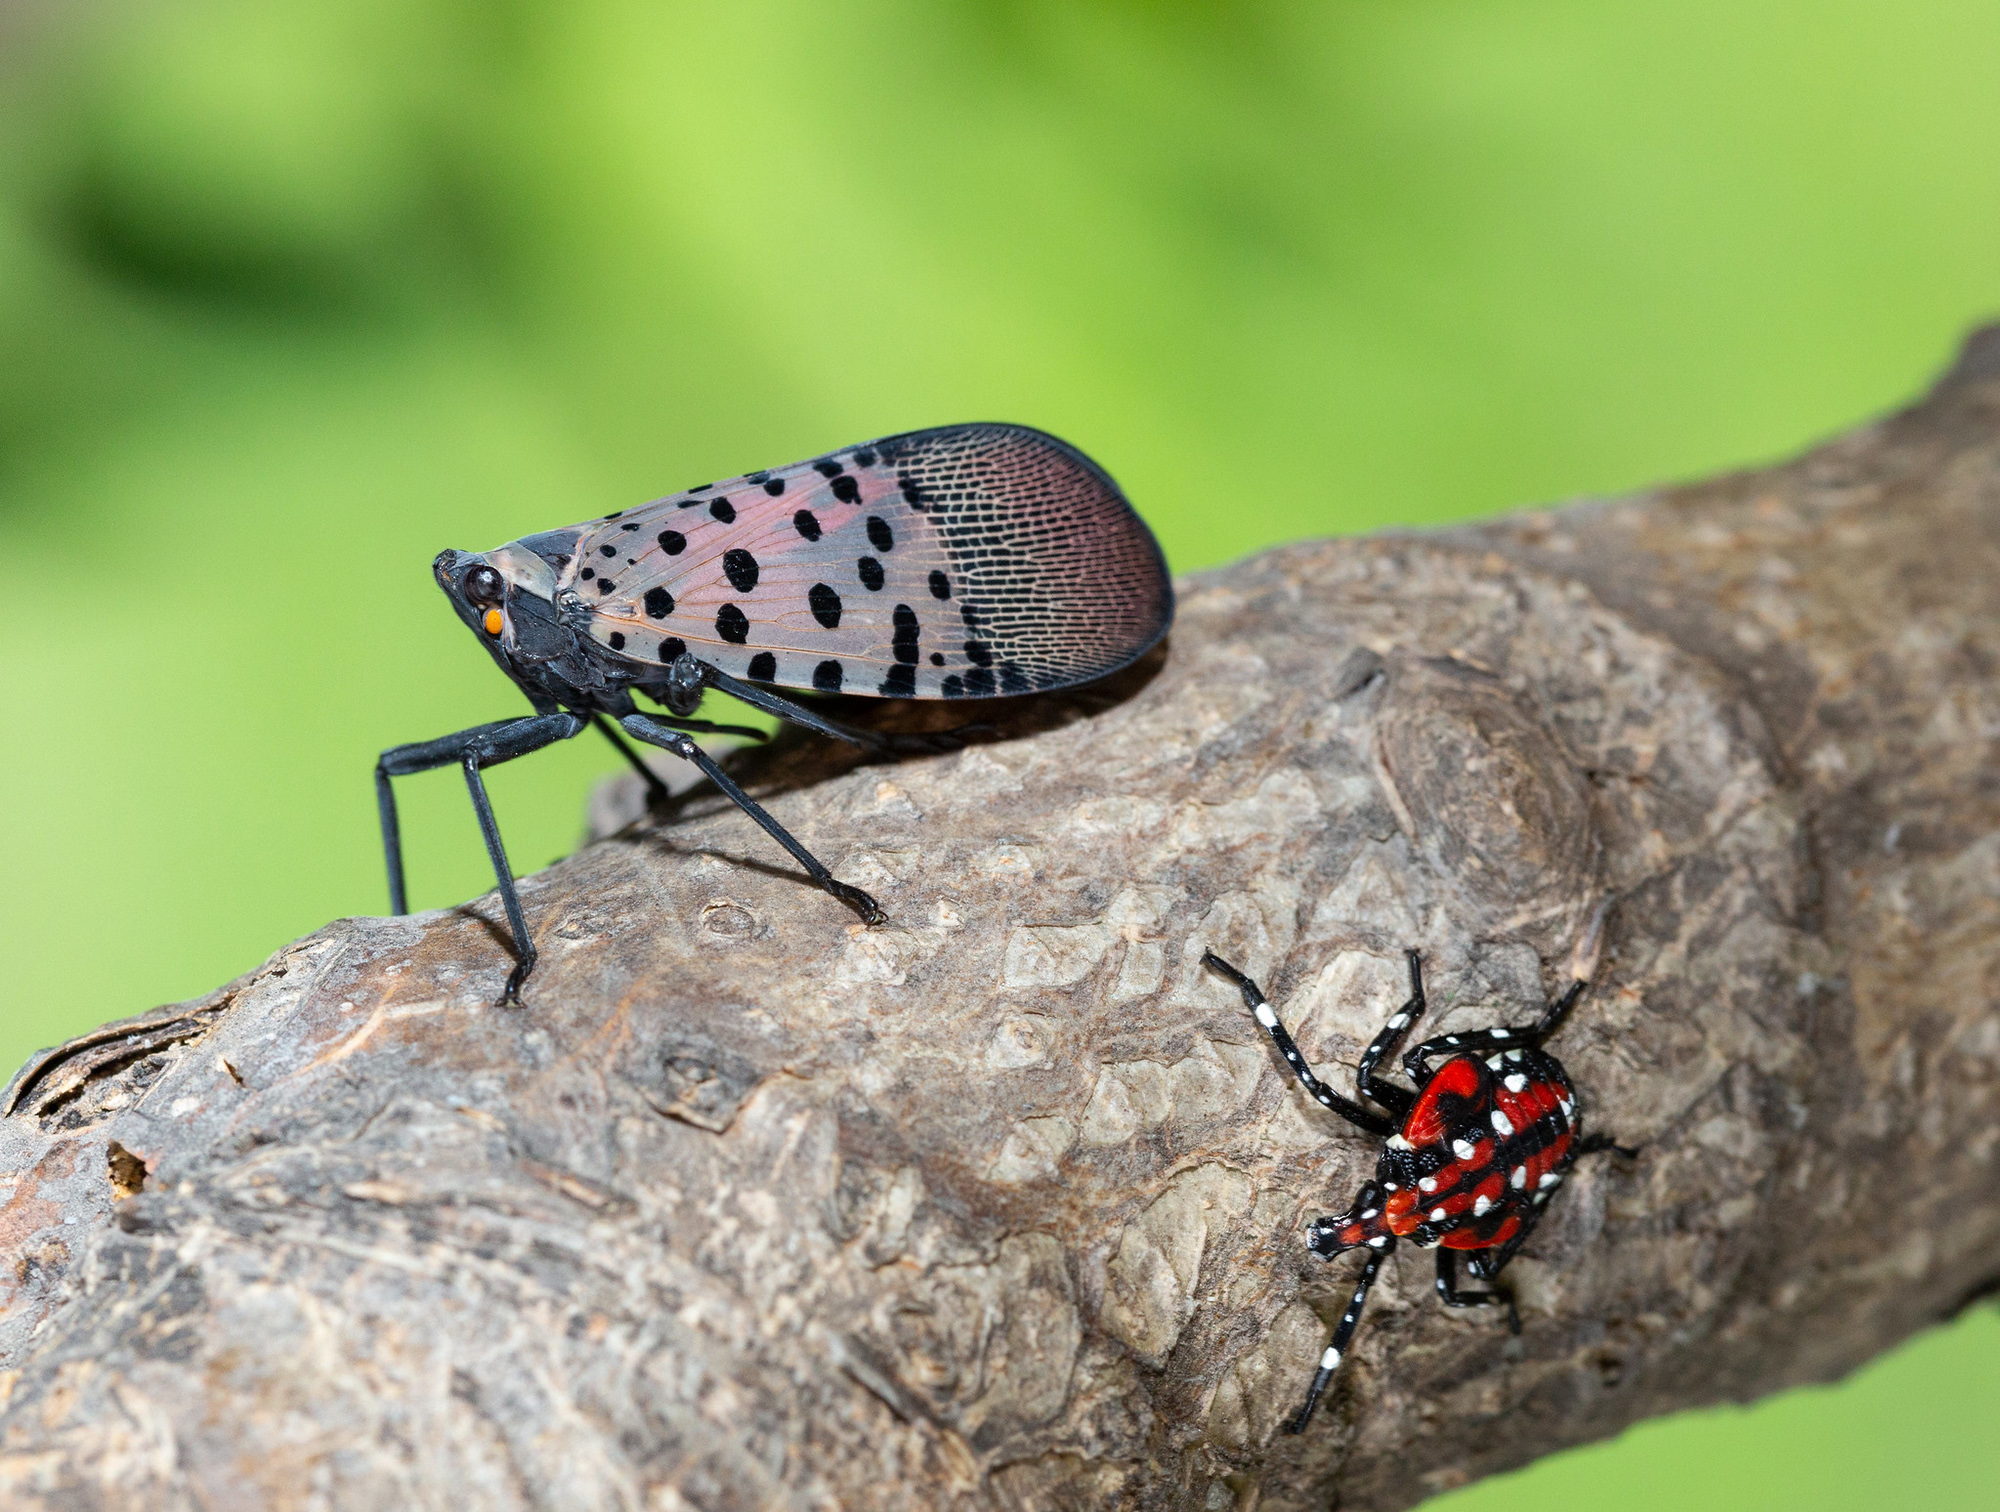 Spotted lanternfly adult and nymph on branch